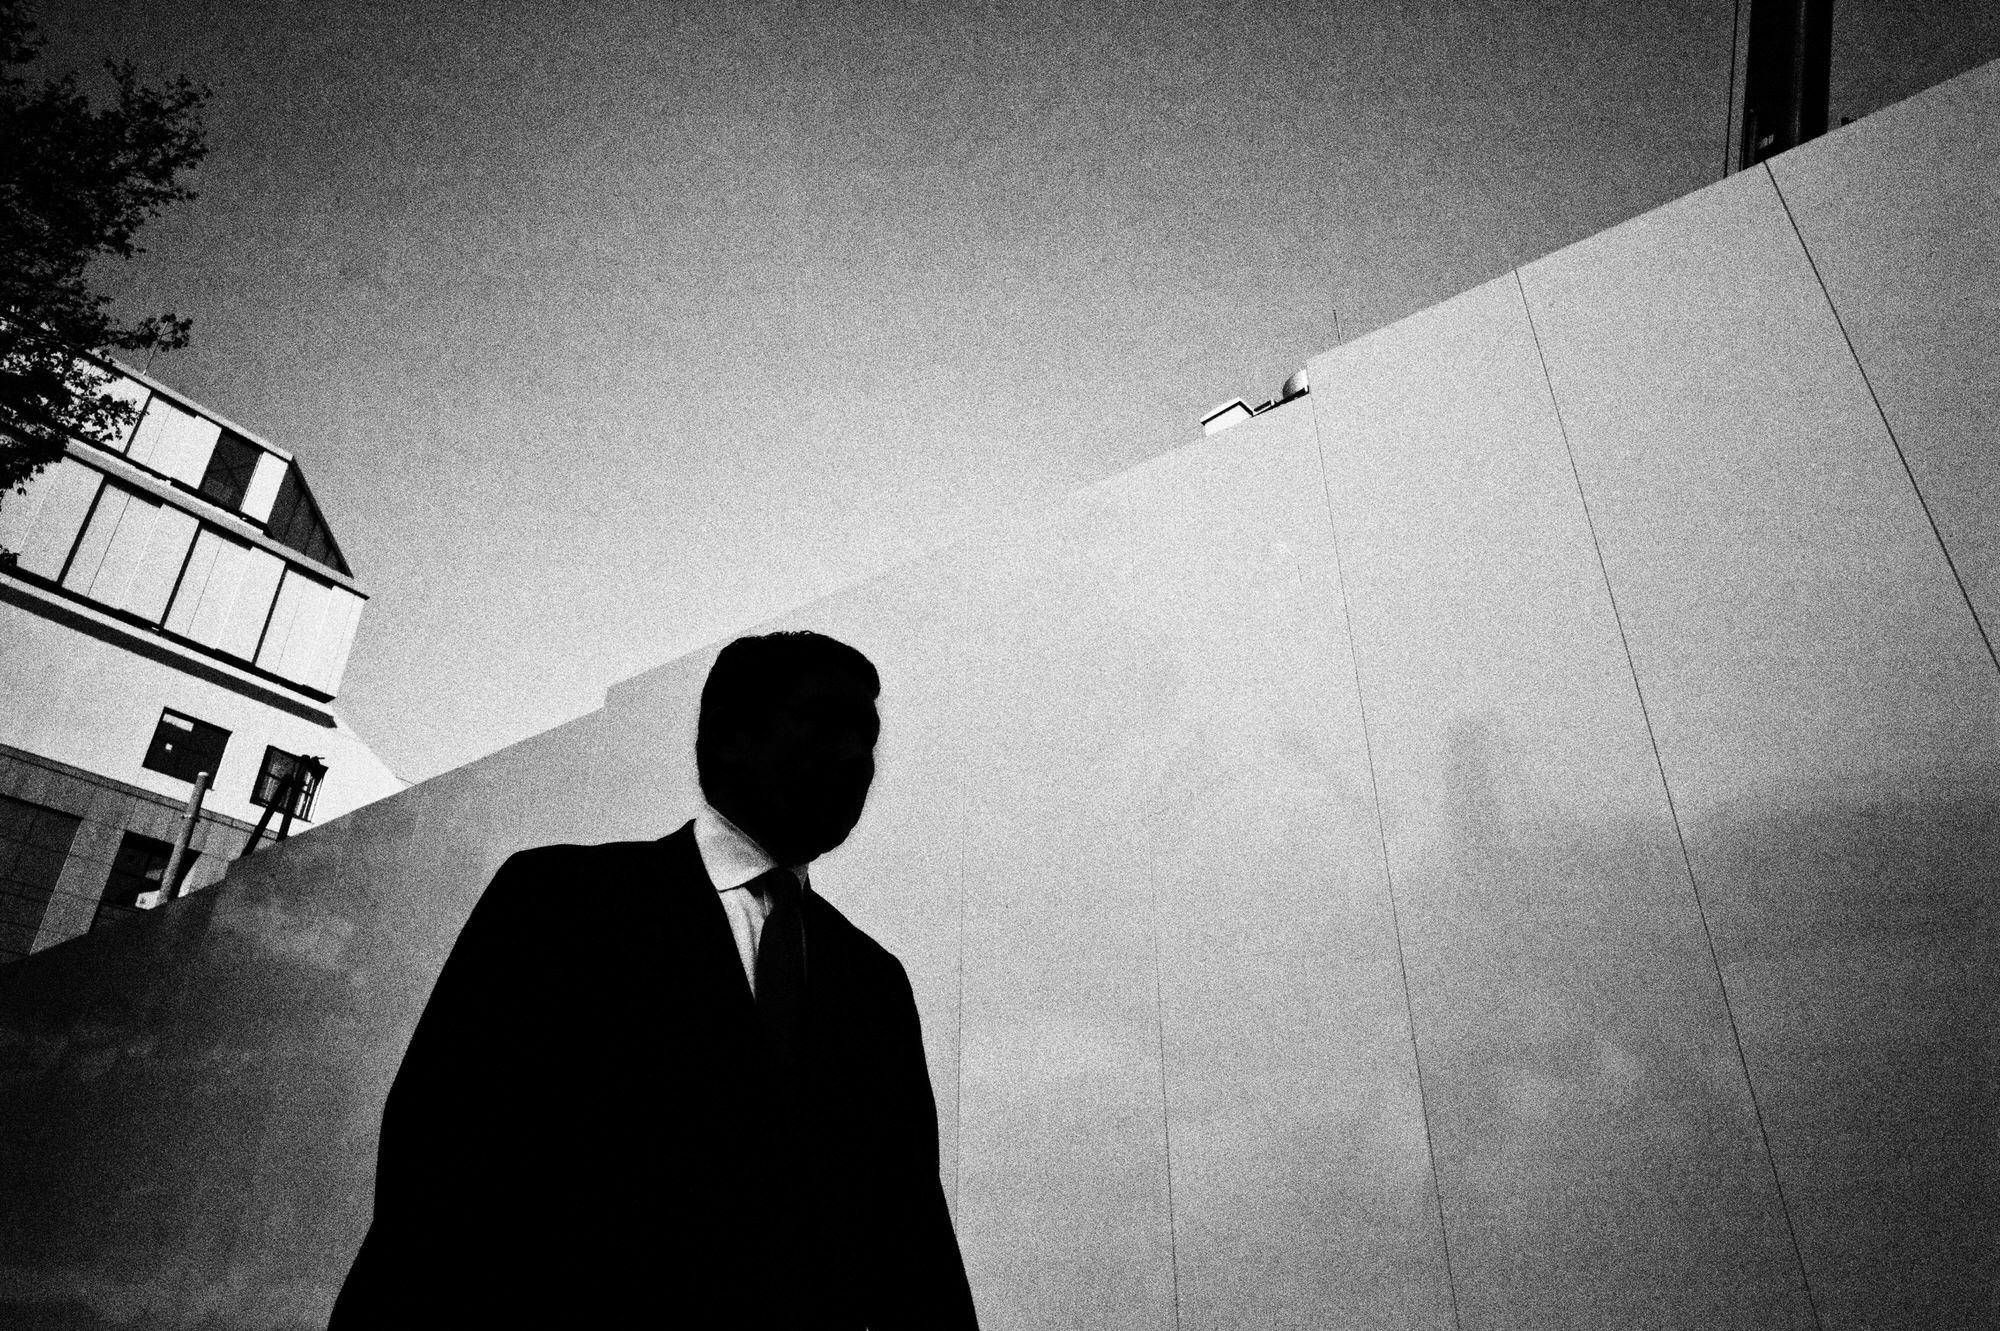 dark-skies-over-tokyo-silhouette-suit-2012-leica m9-21mm-eric kim street photograpy - black and white - Monochrome-4